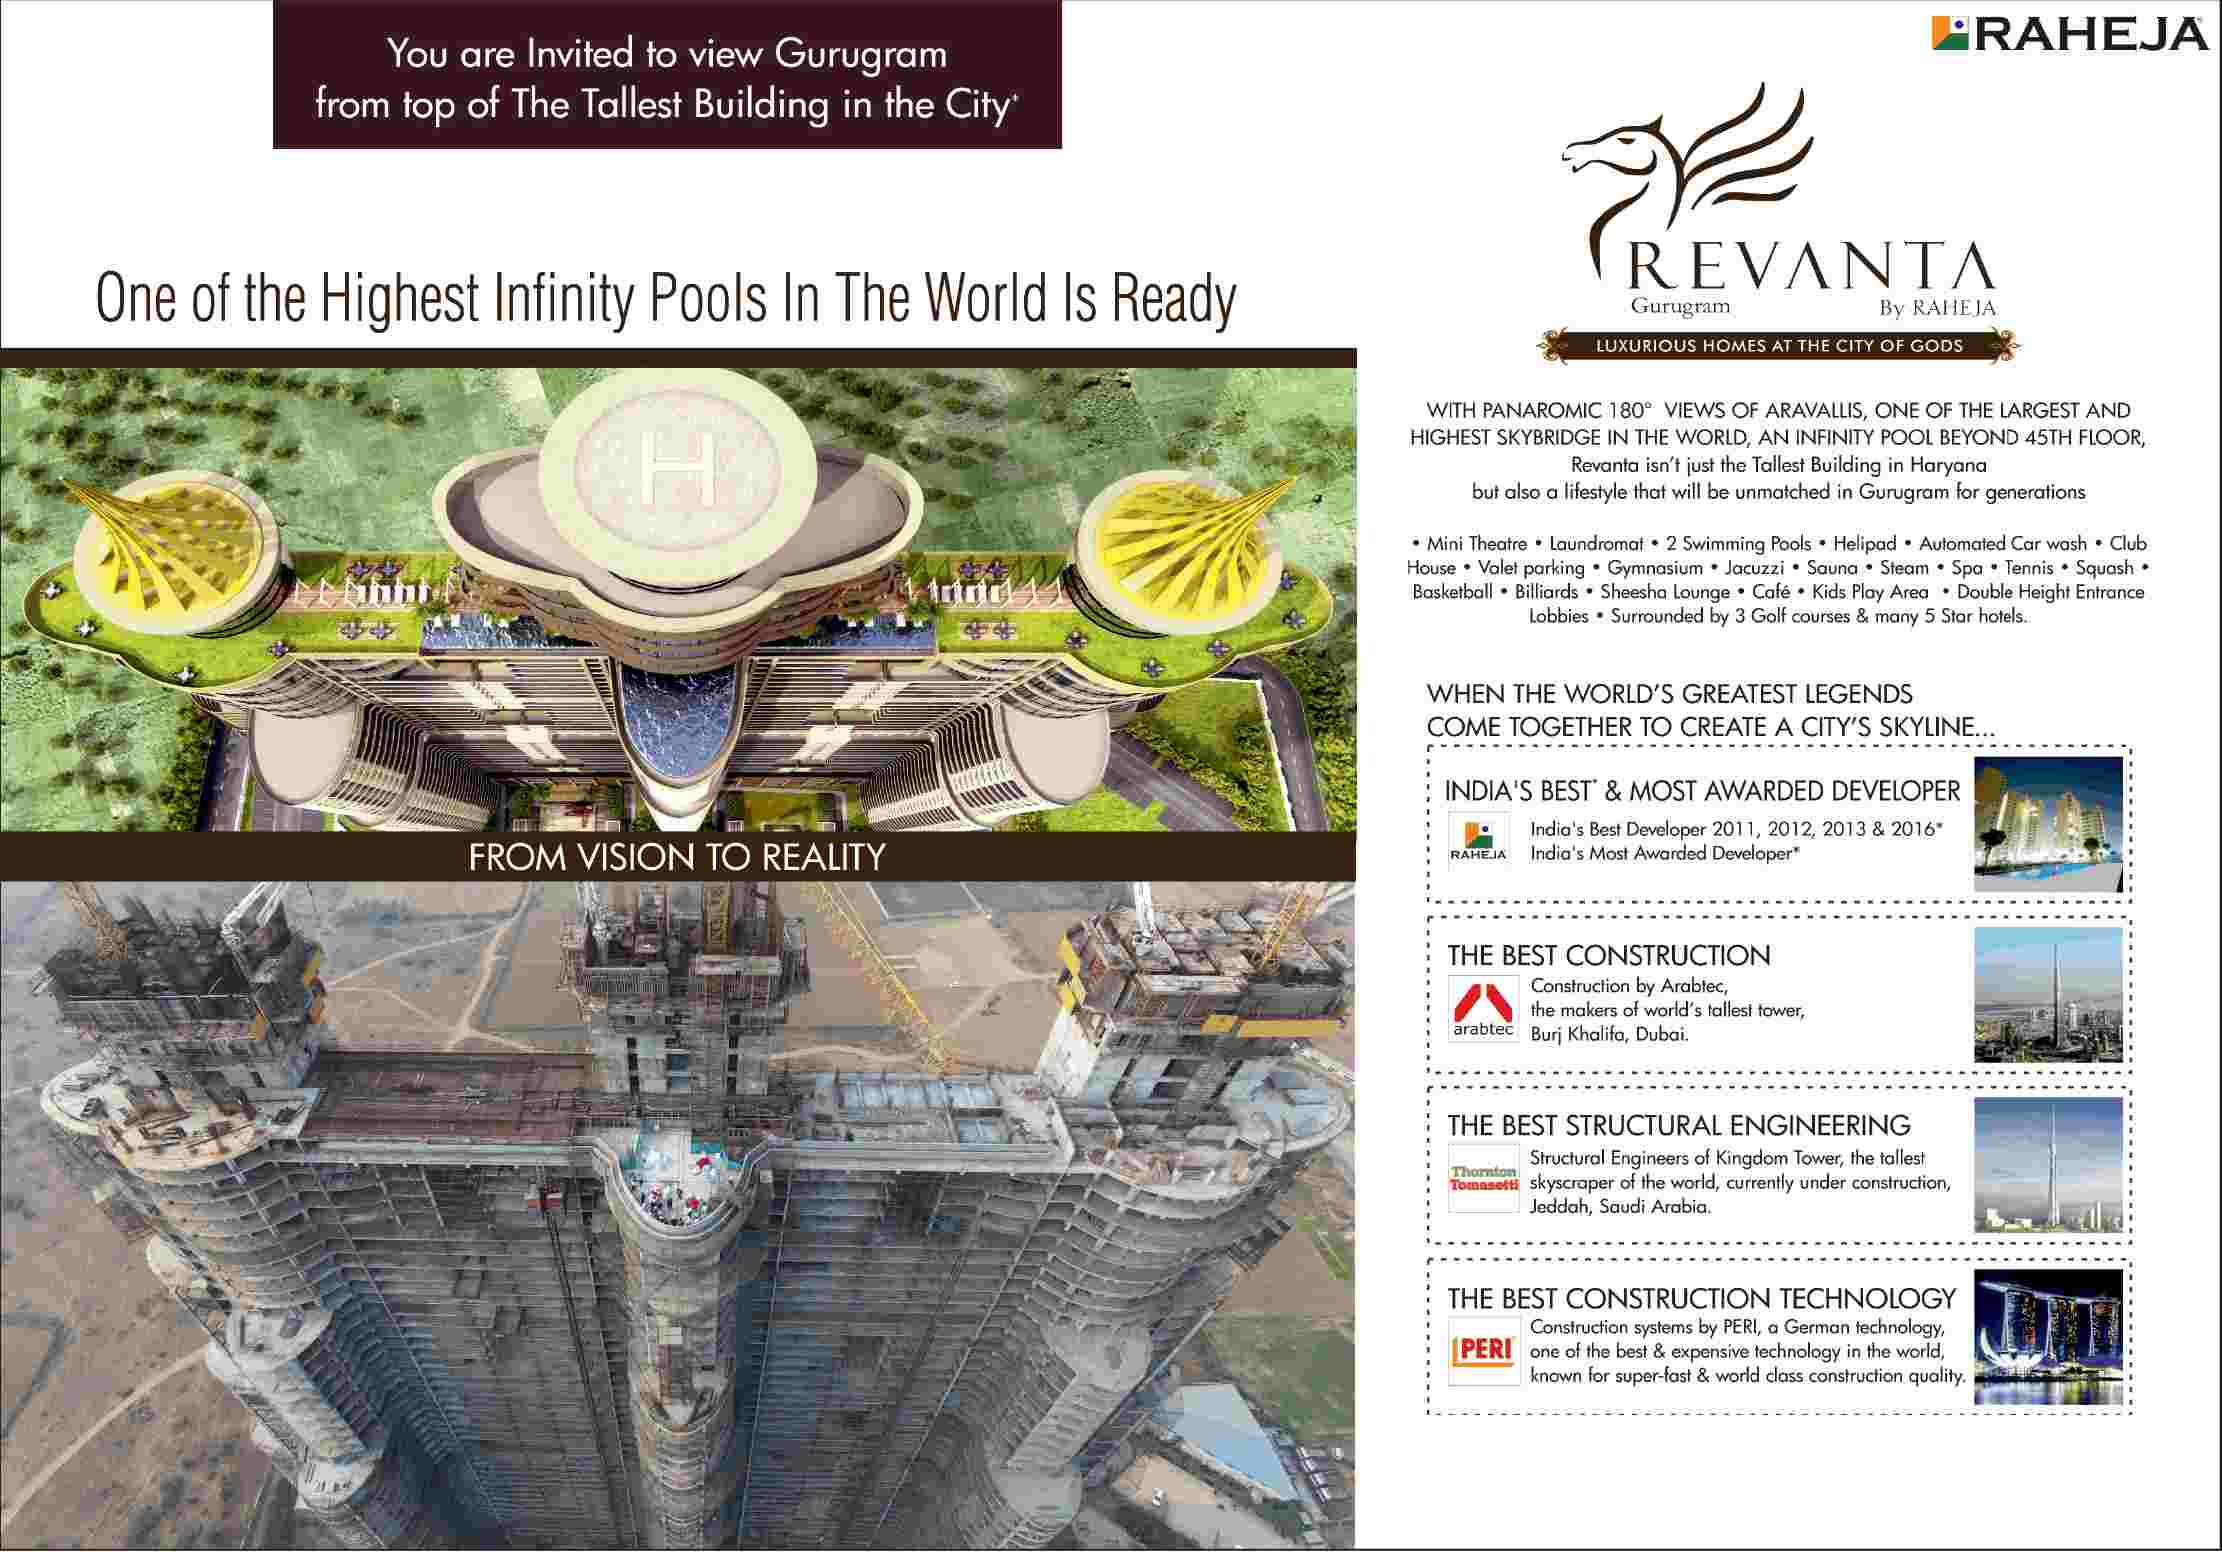 One of the highest infinity pools in the world is ready at Raheja Revanta in Gurgaon